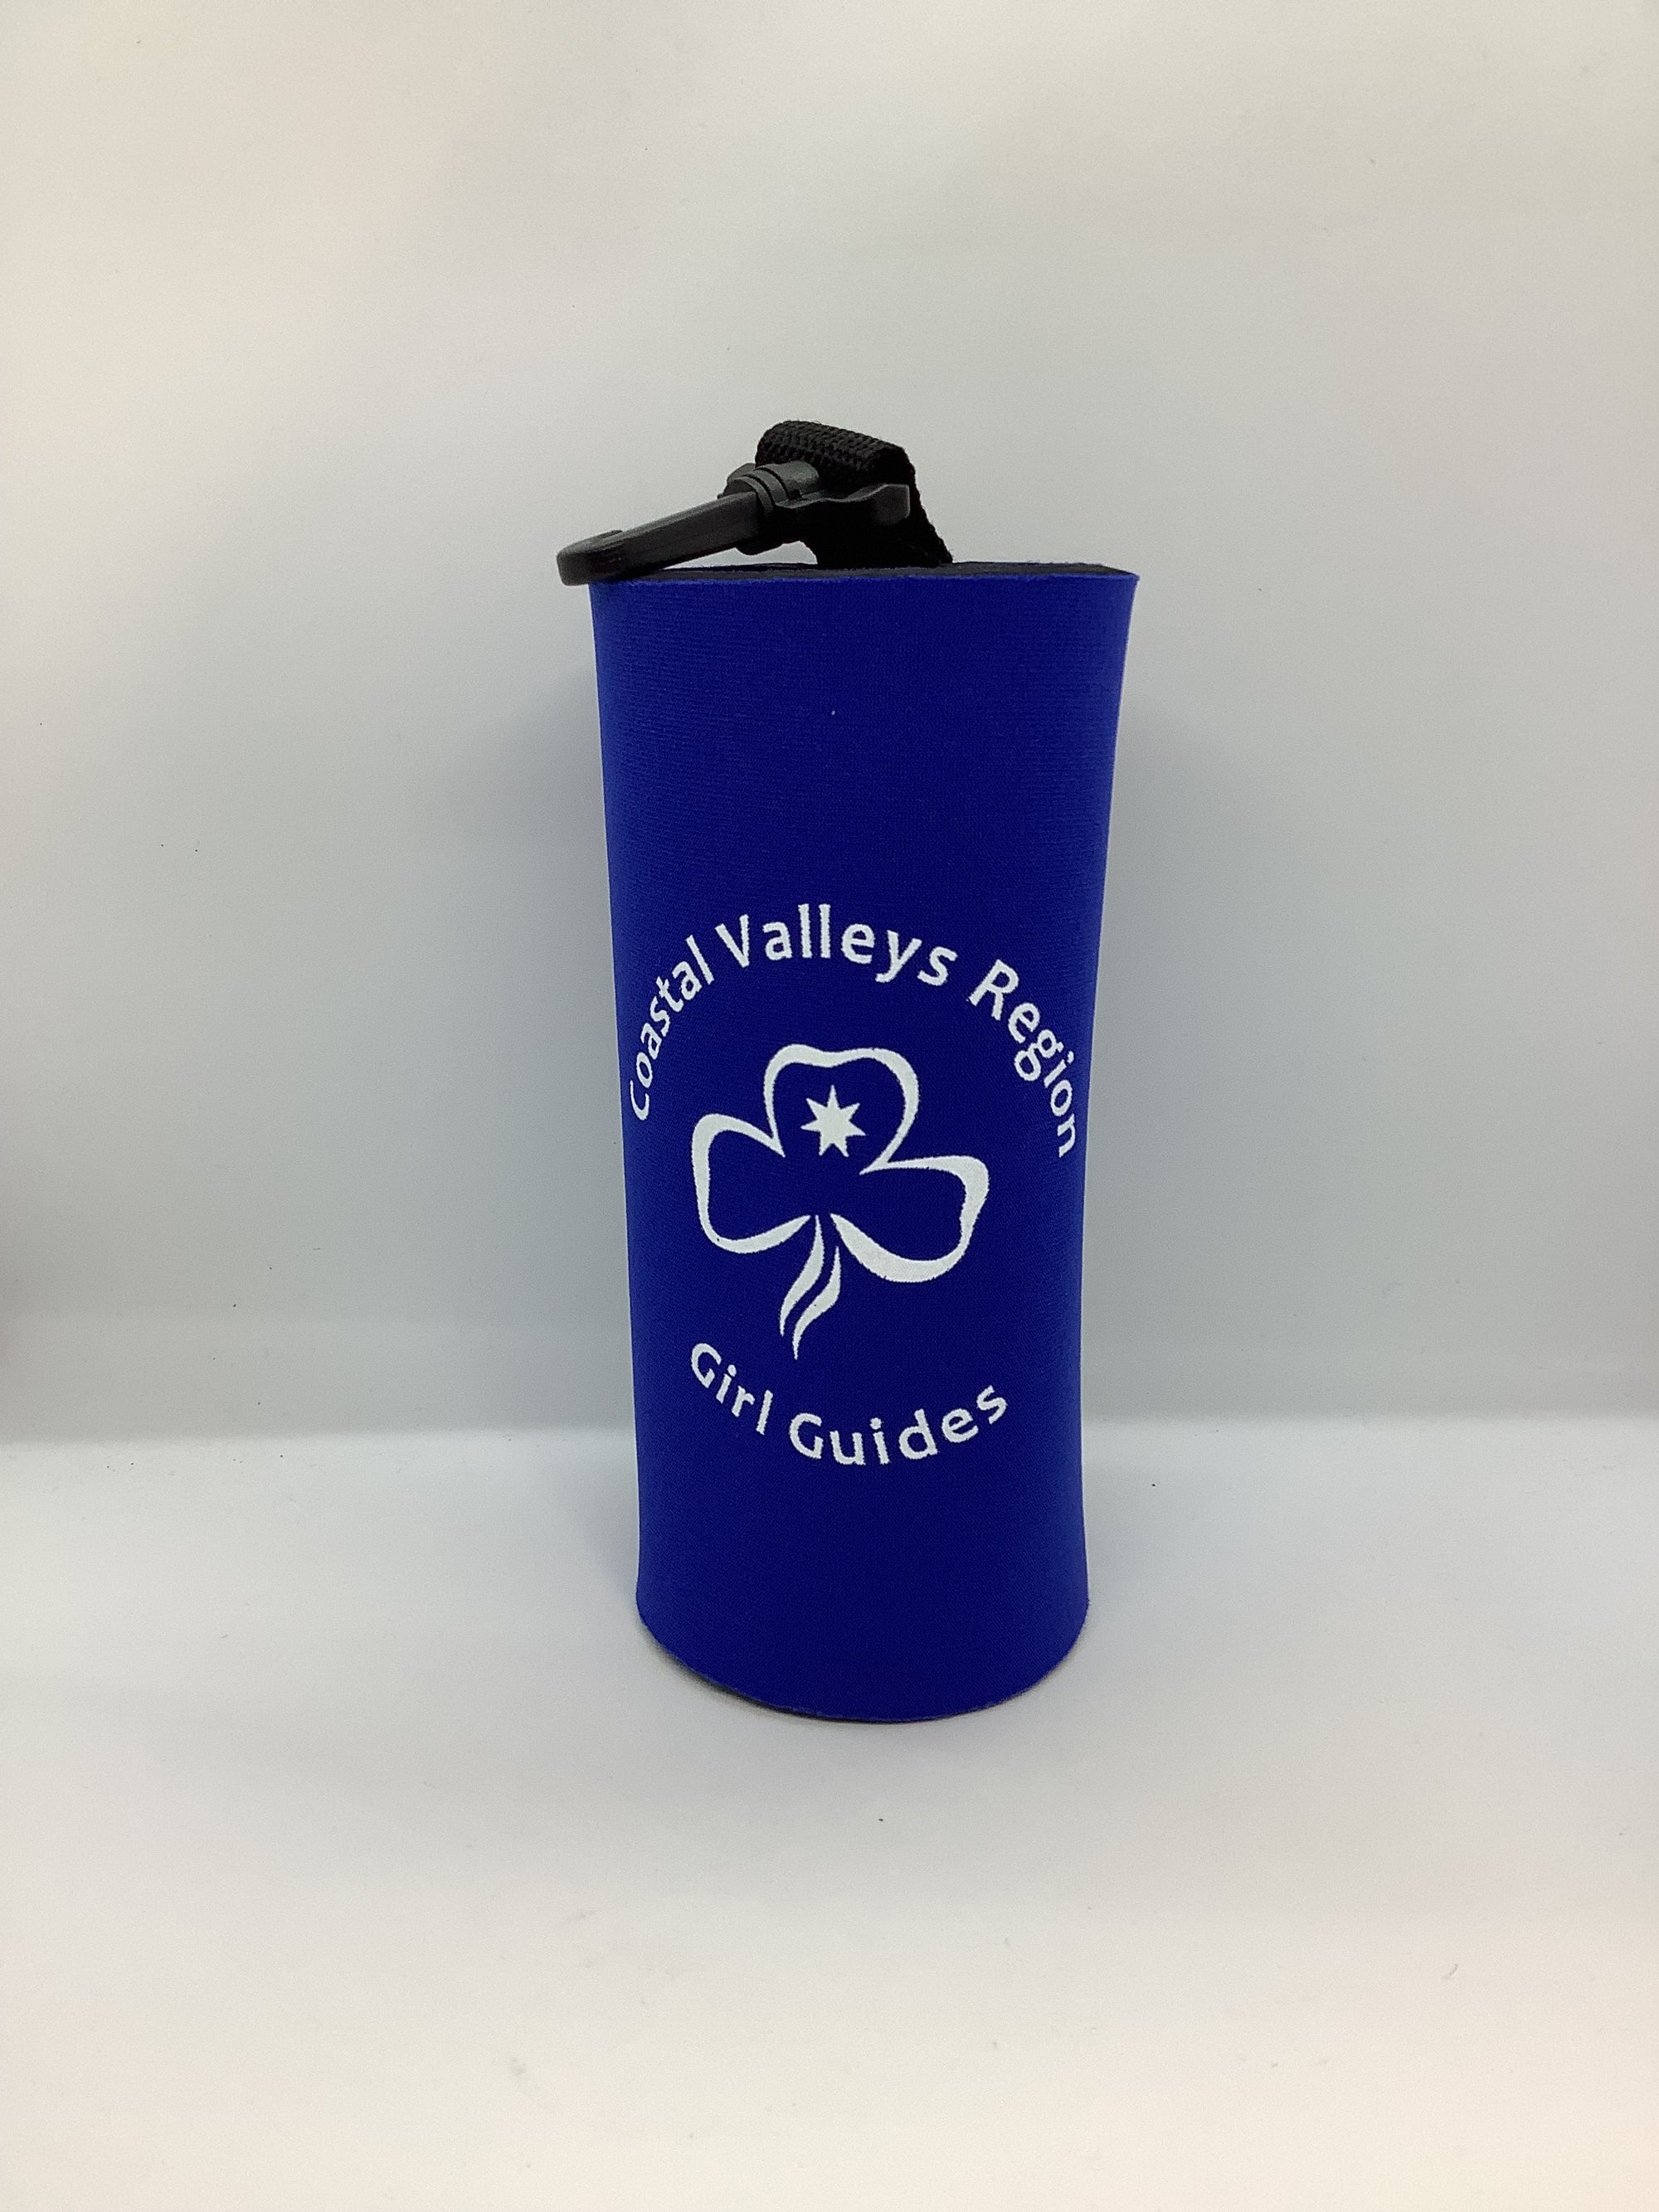 a blue bottle cooler with coastal valleys region and a trefoil on